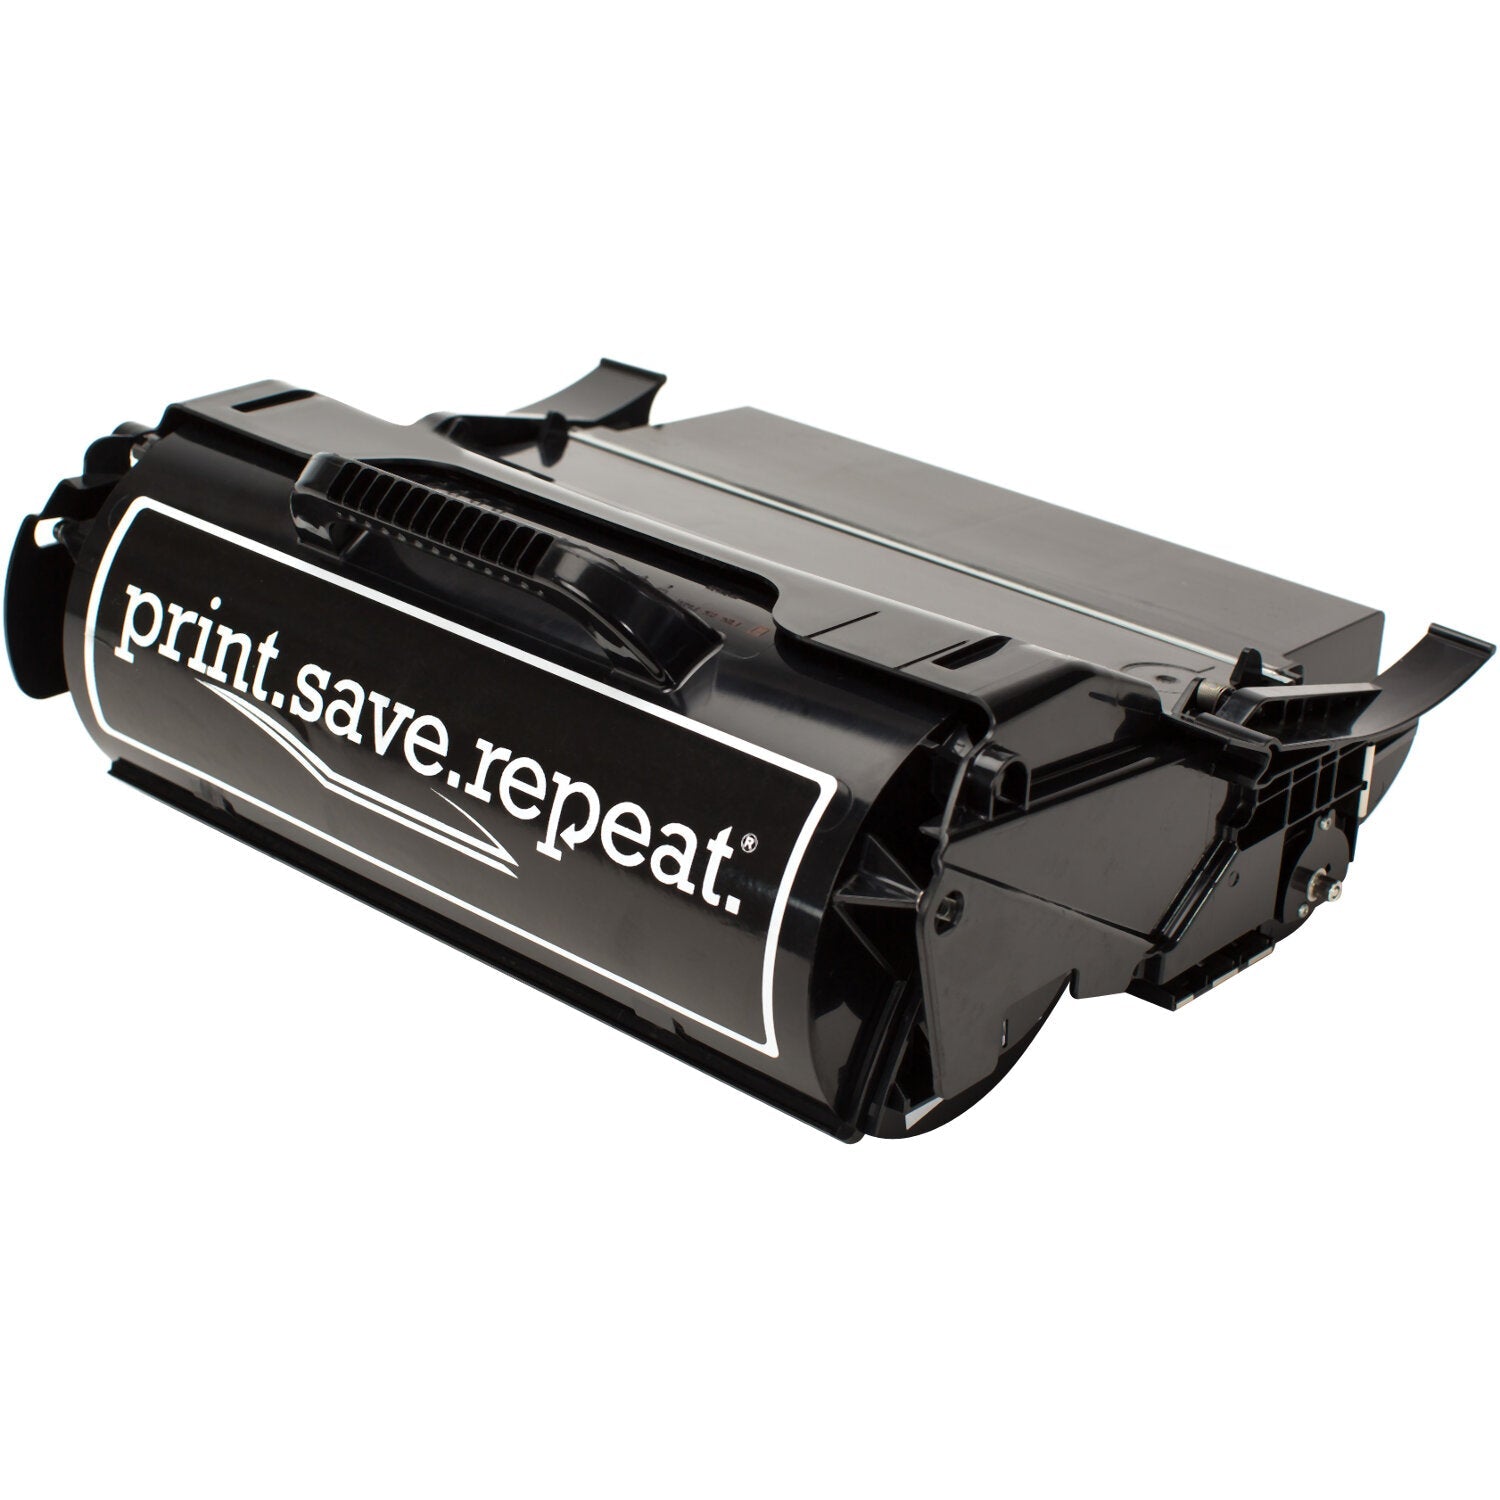 Print.Save.Repeat. Lexmark X651A41G Remanufactured Toner Cartridge for X651, X652, X654, X656, X658 [7,000 Pages]